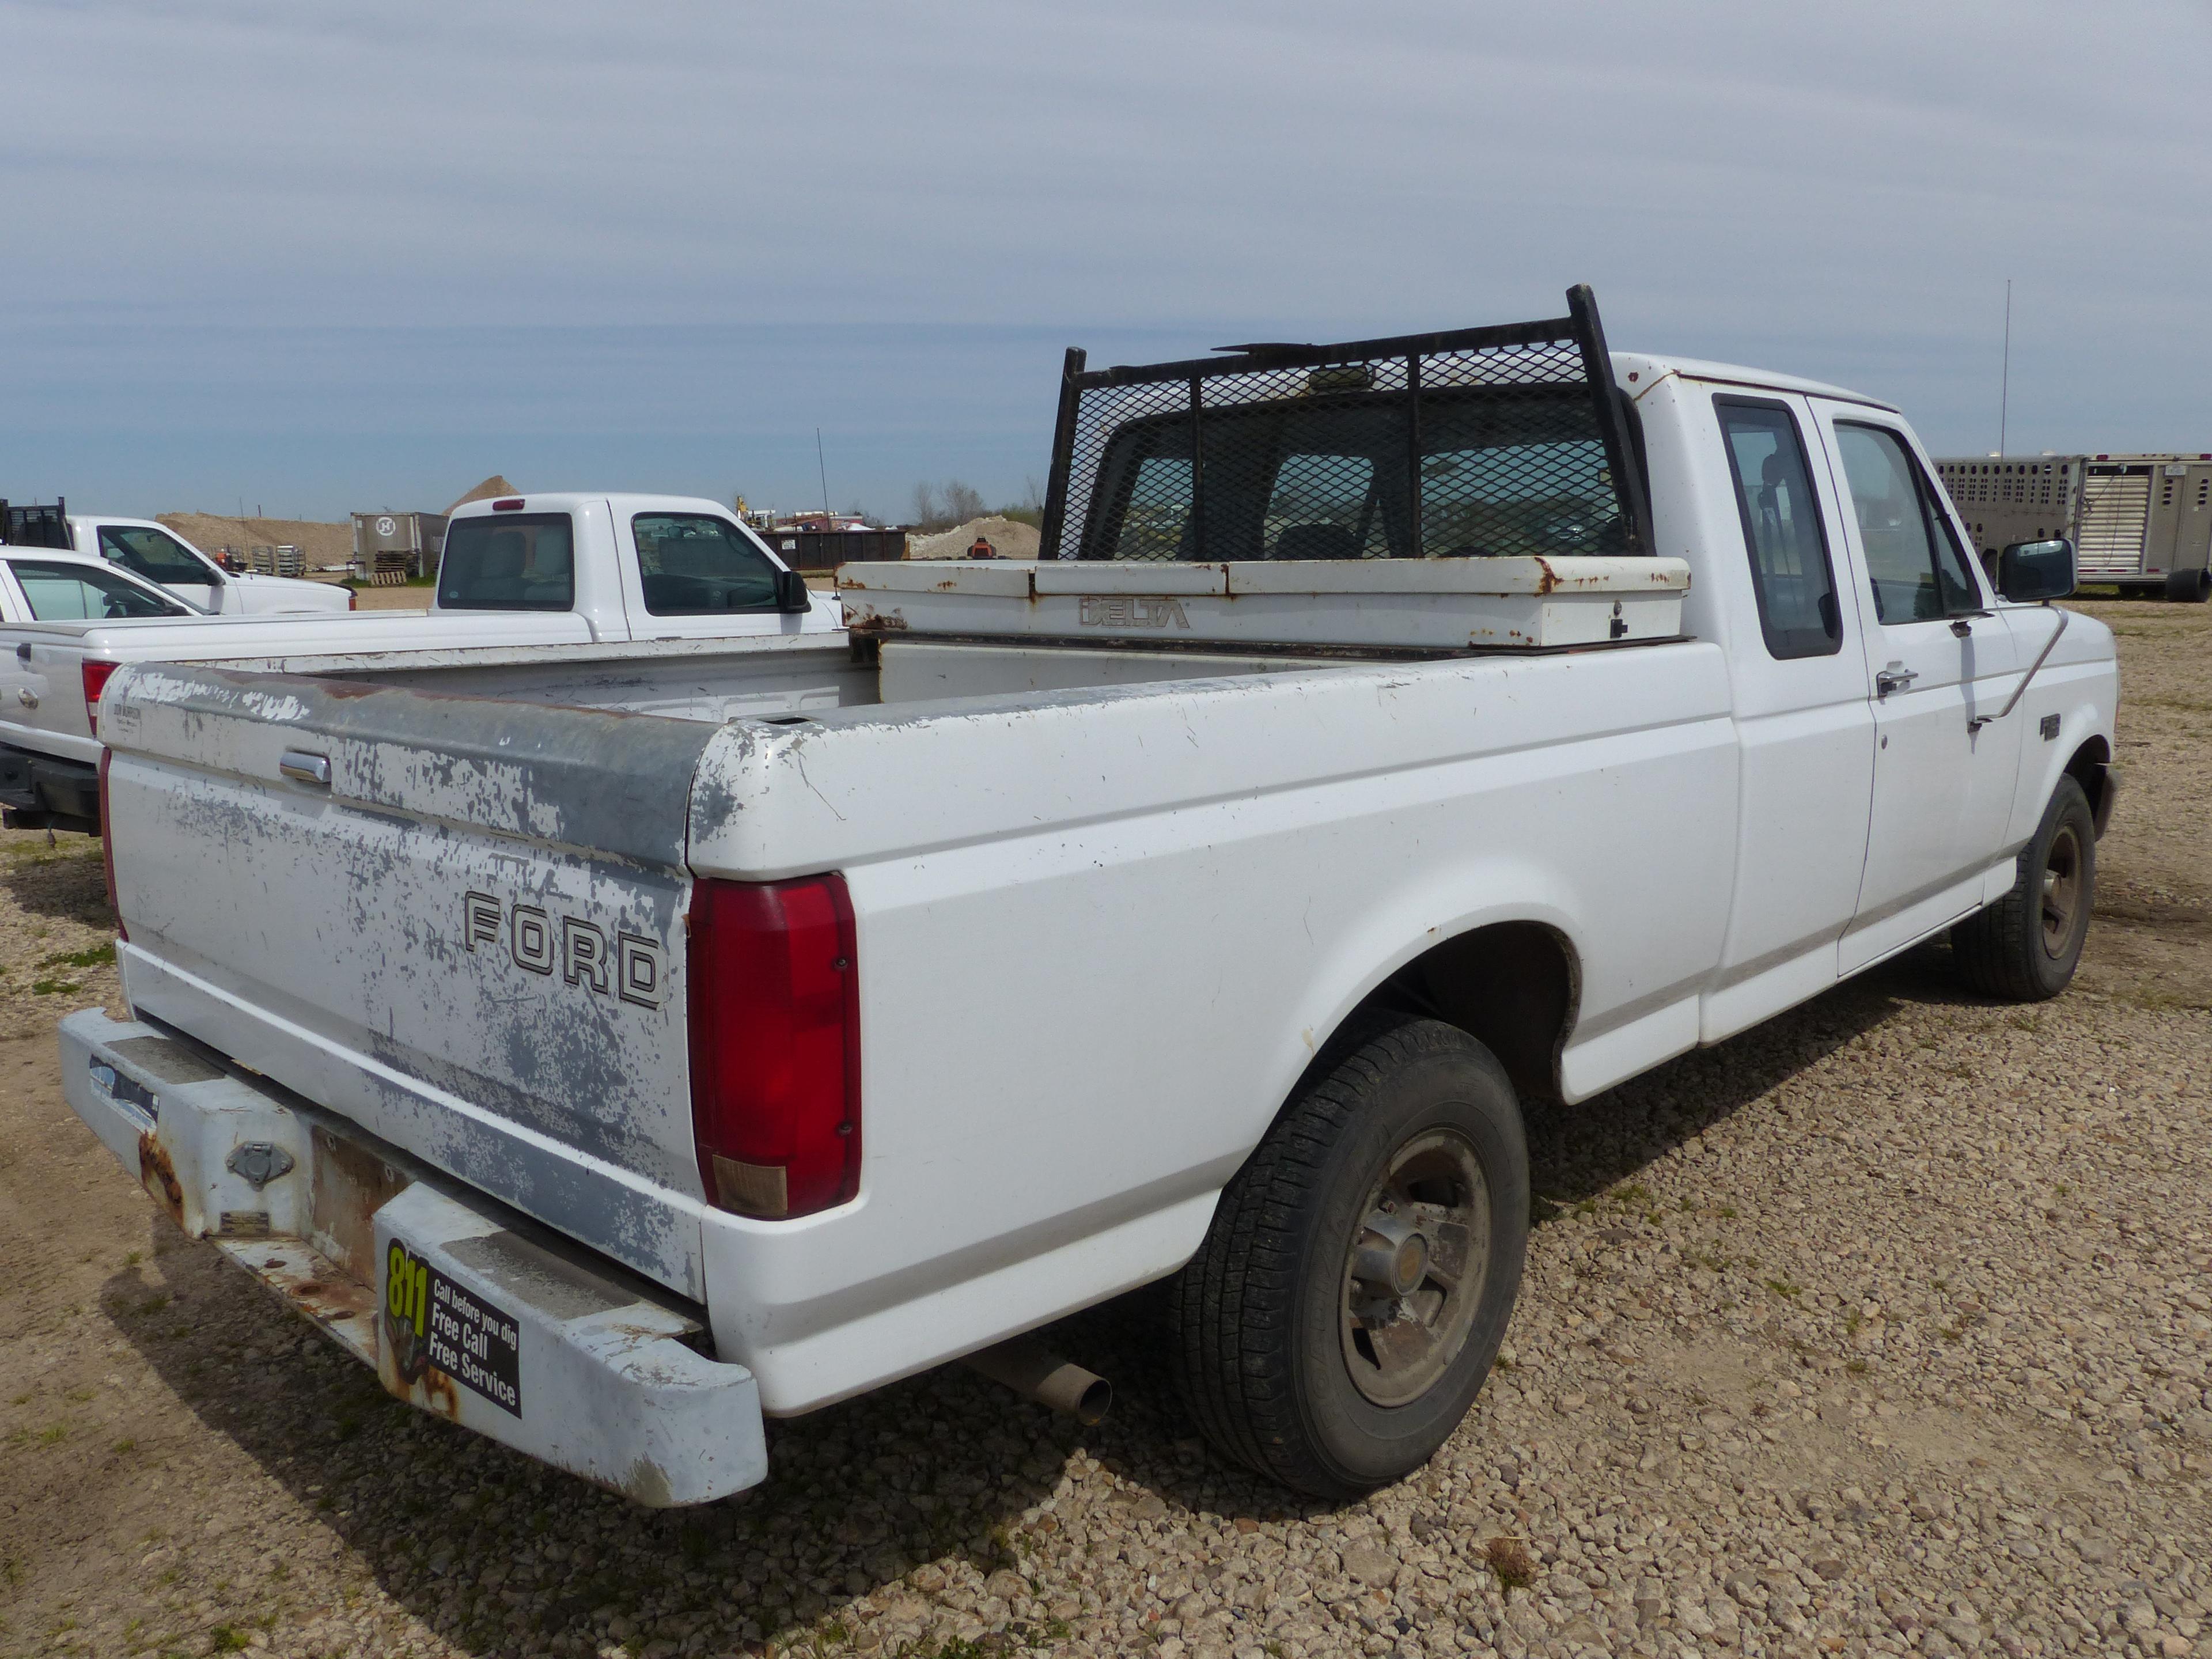 1992 FORD F150 EXTENDED CAB TRUCK